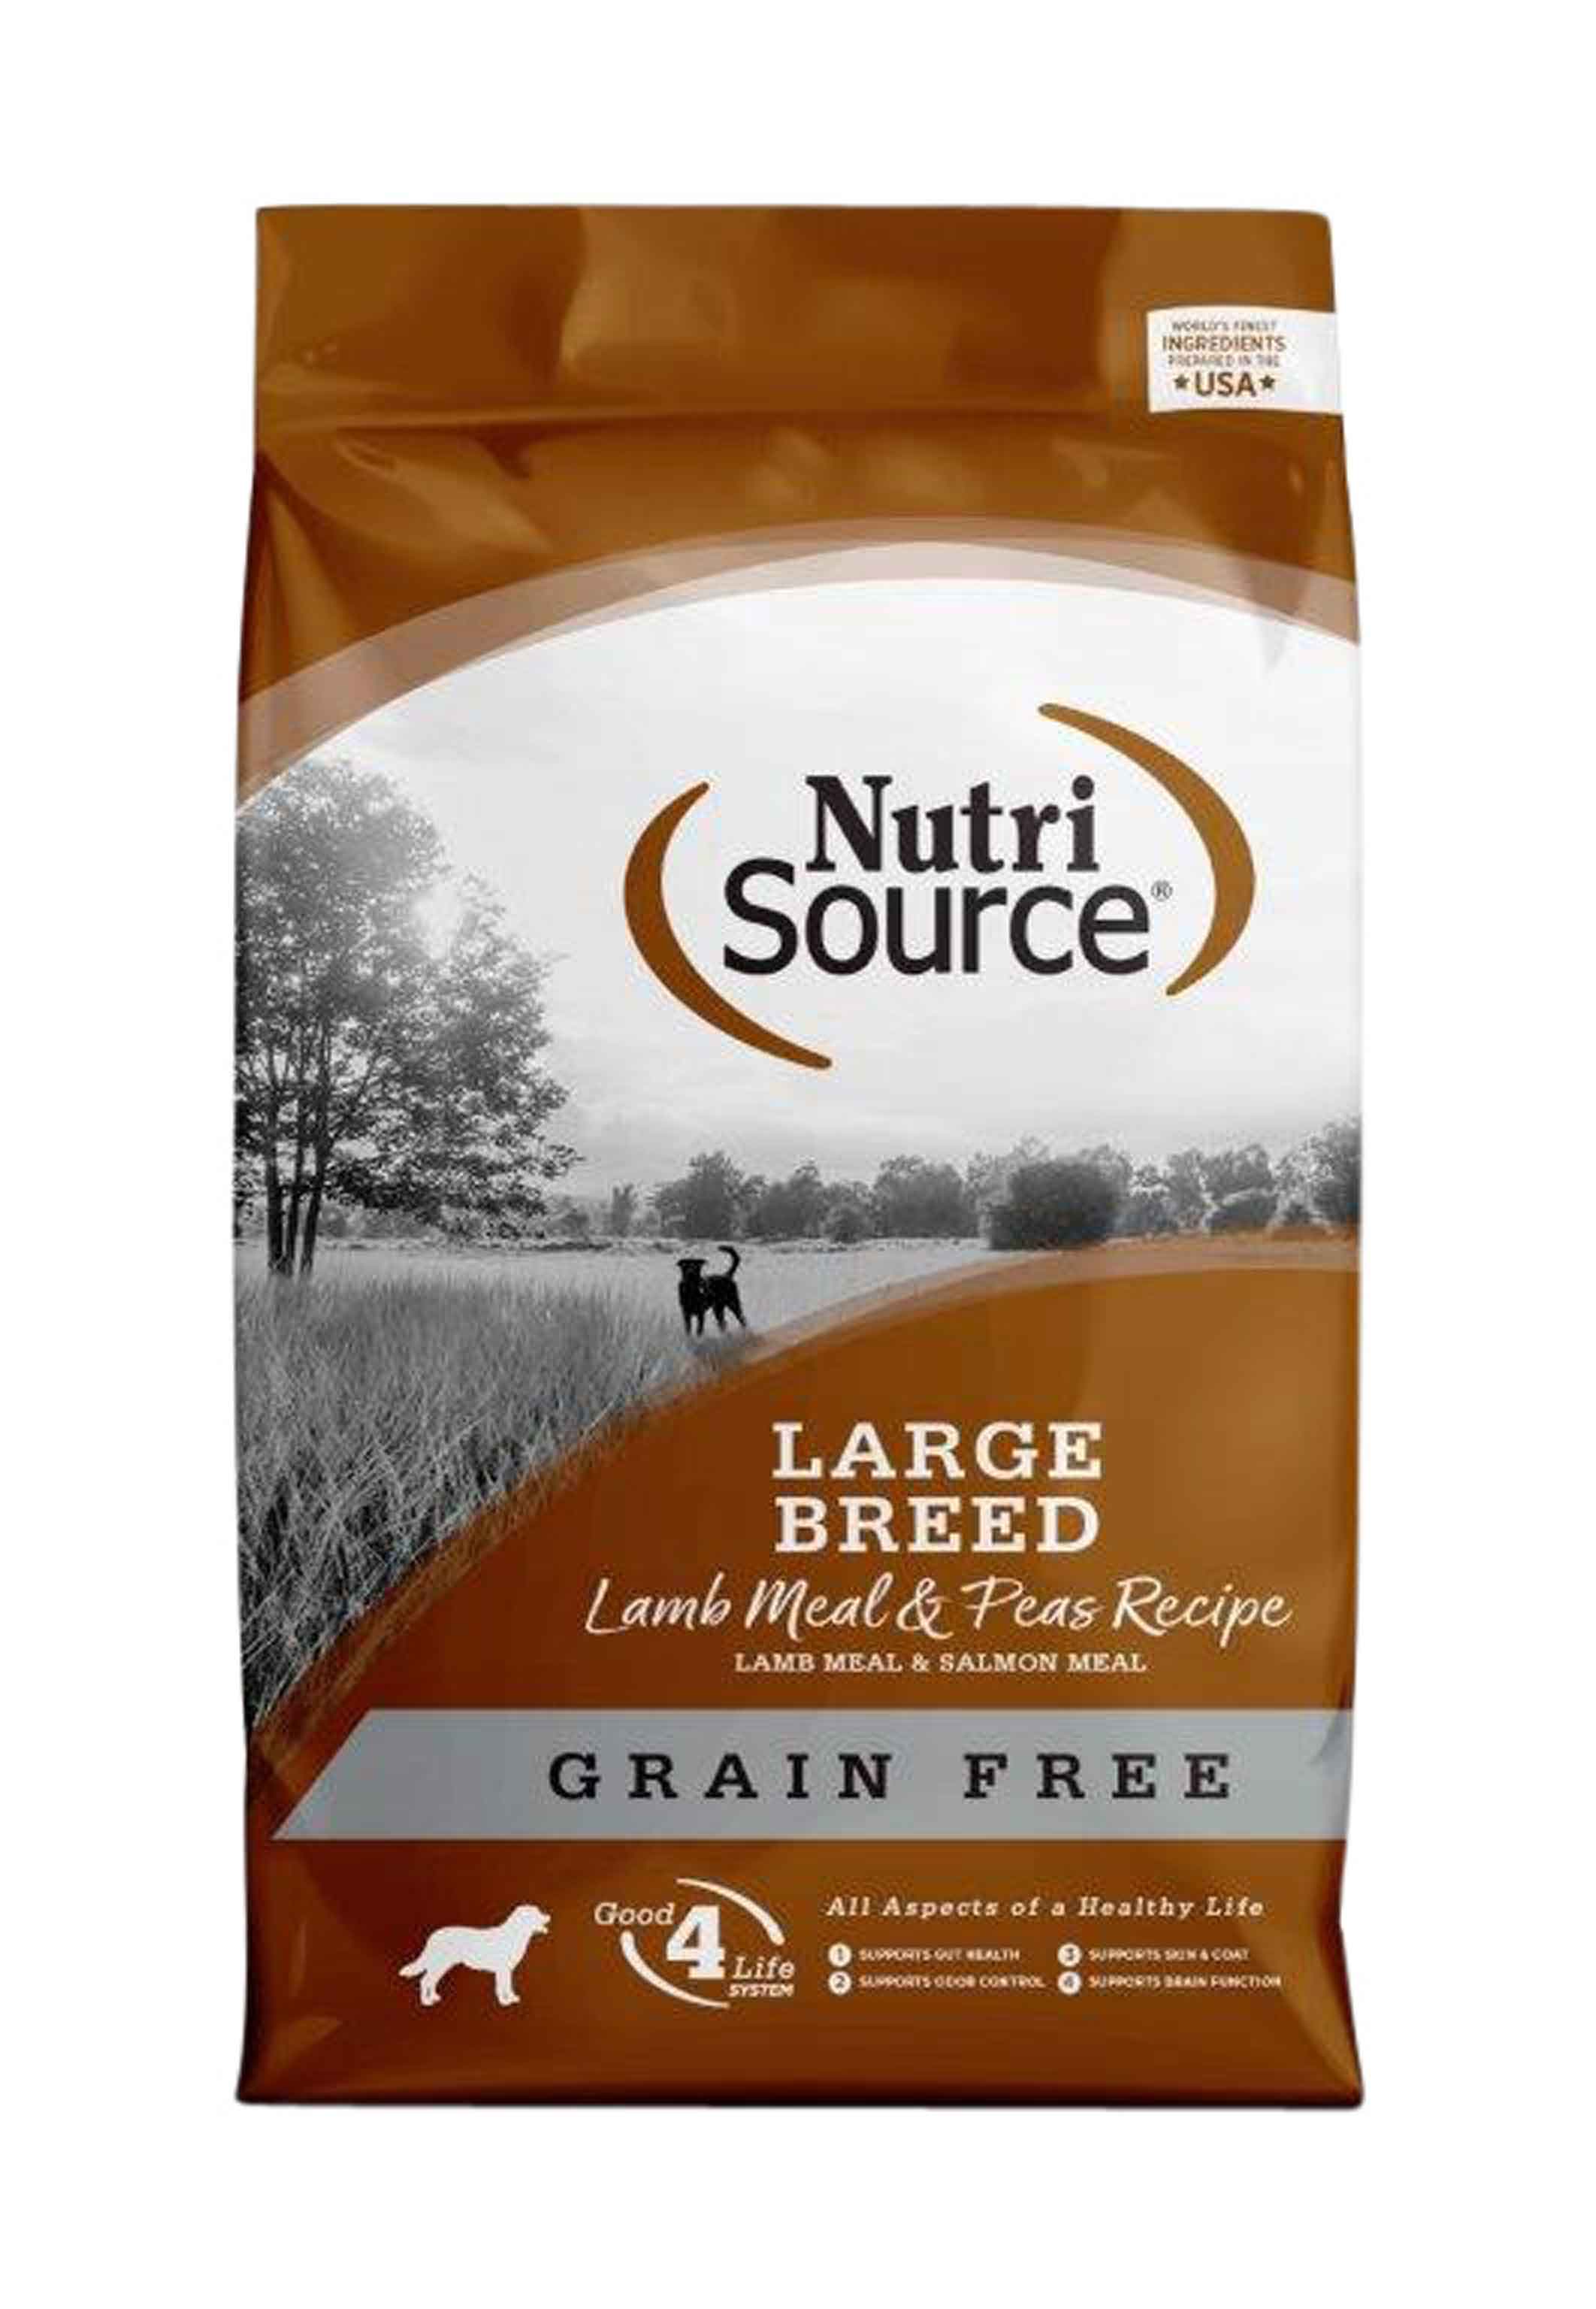 NutriSource Dog Food Grain Free Lamb Large Breed, 30 Pounds